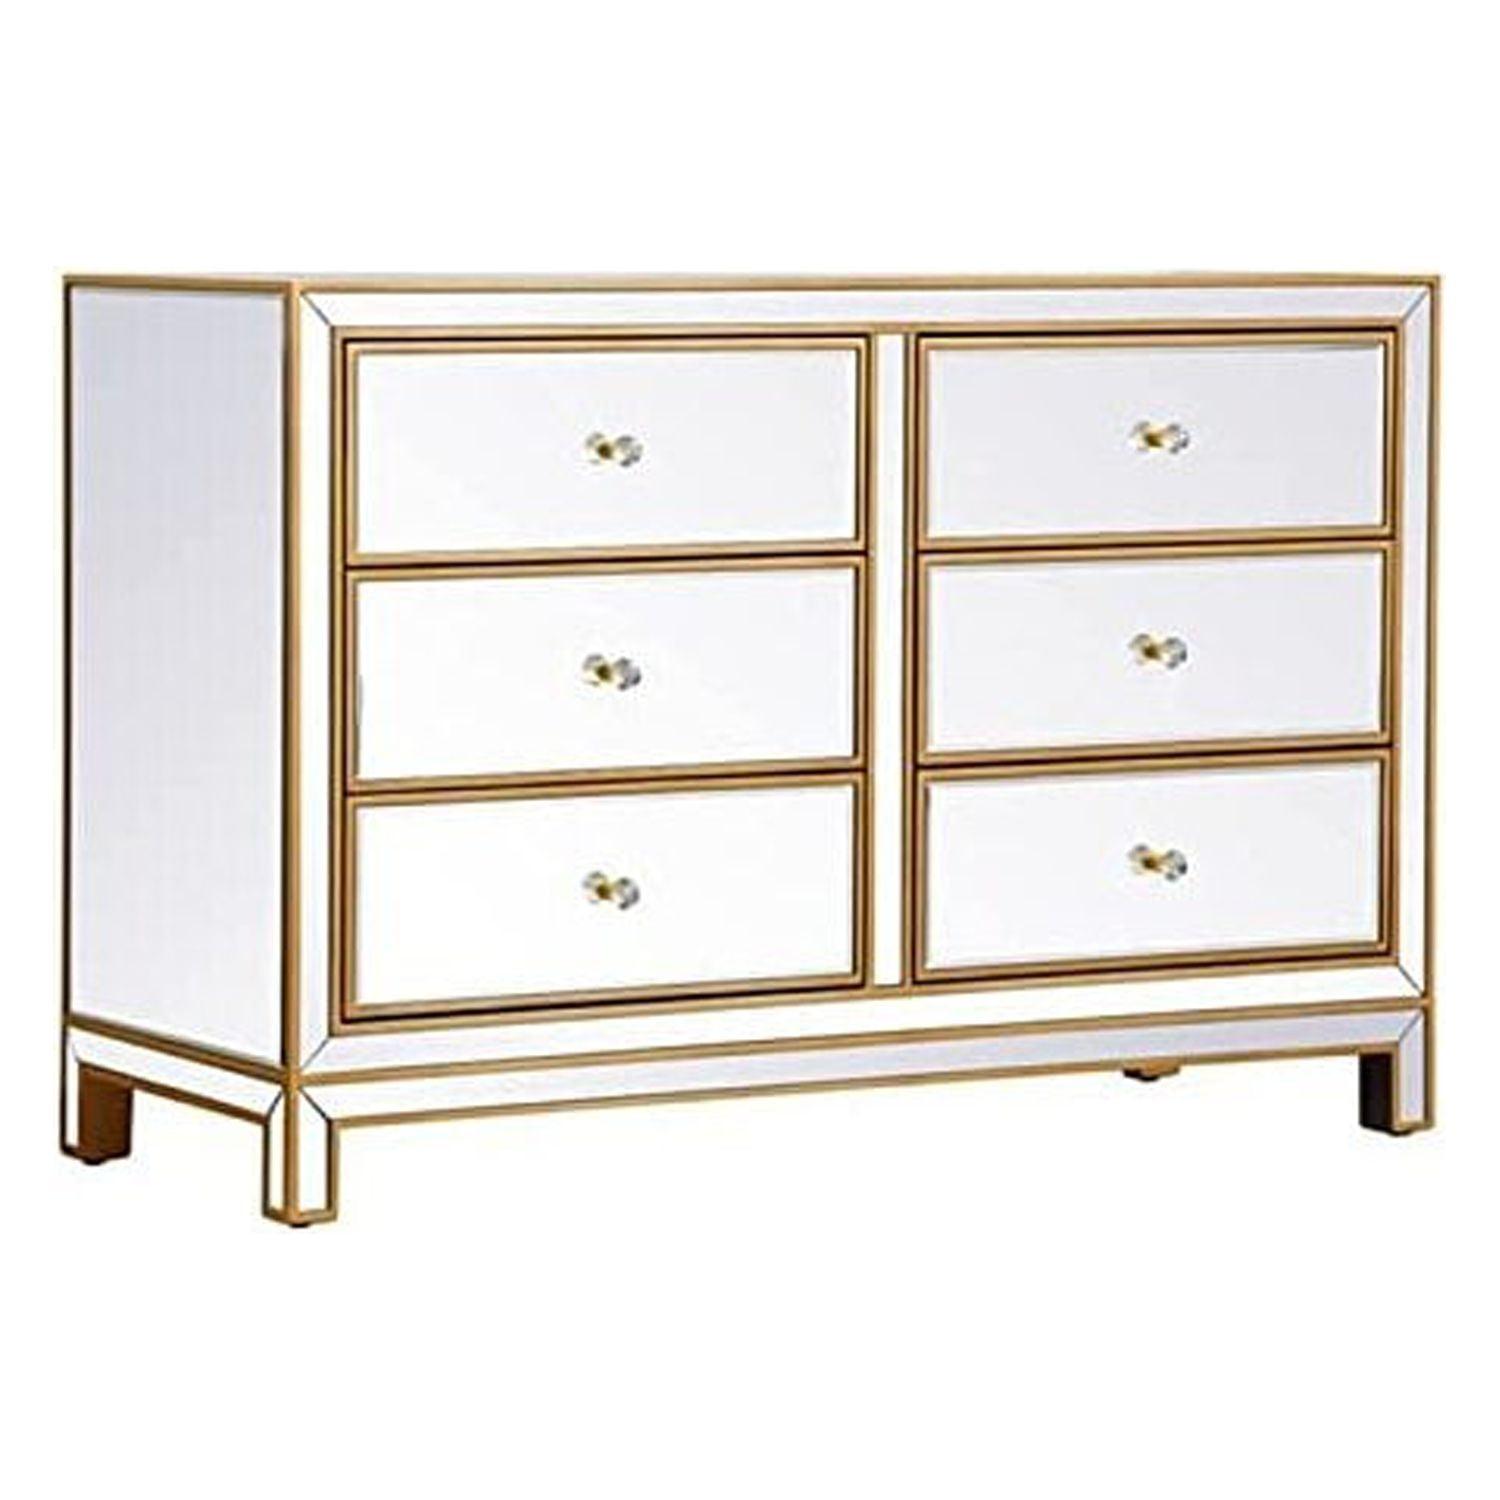 Luxurious Gold 6-Drawer Dresser with Crystal Knobs and Mirrored Panels